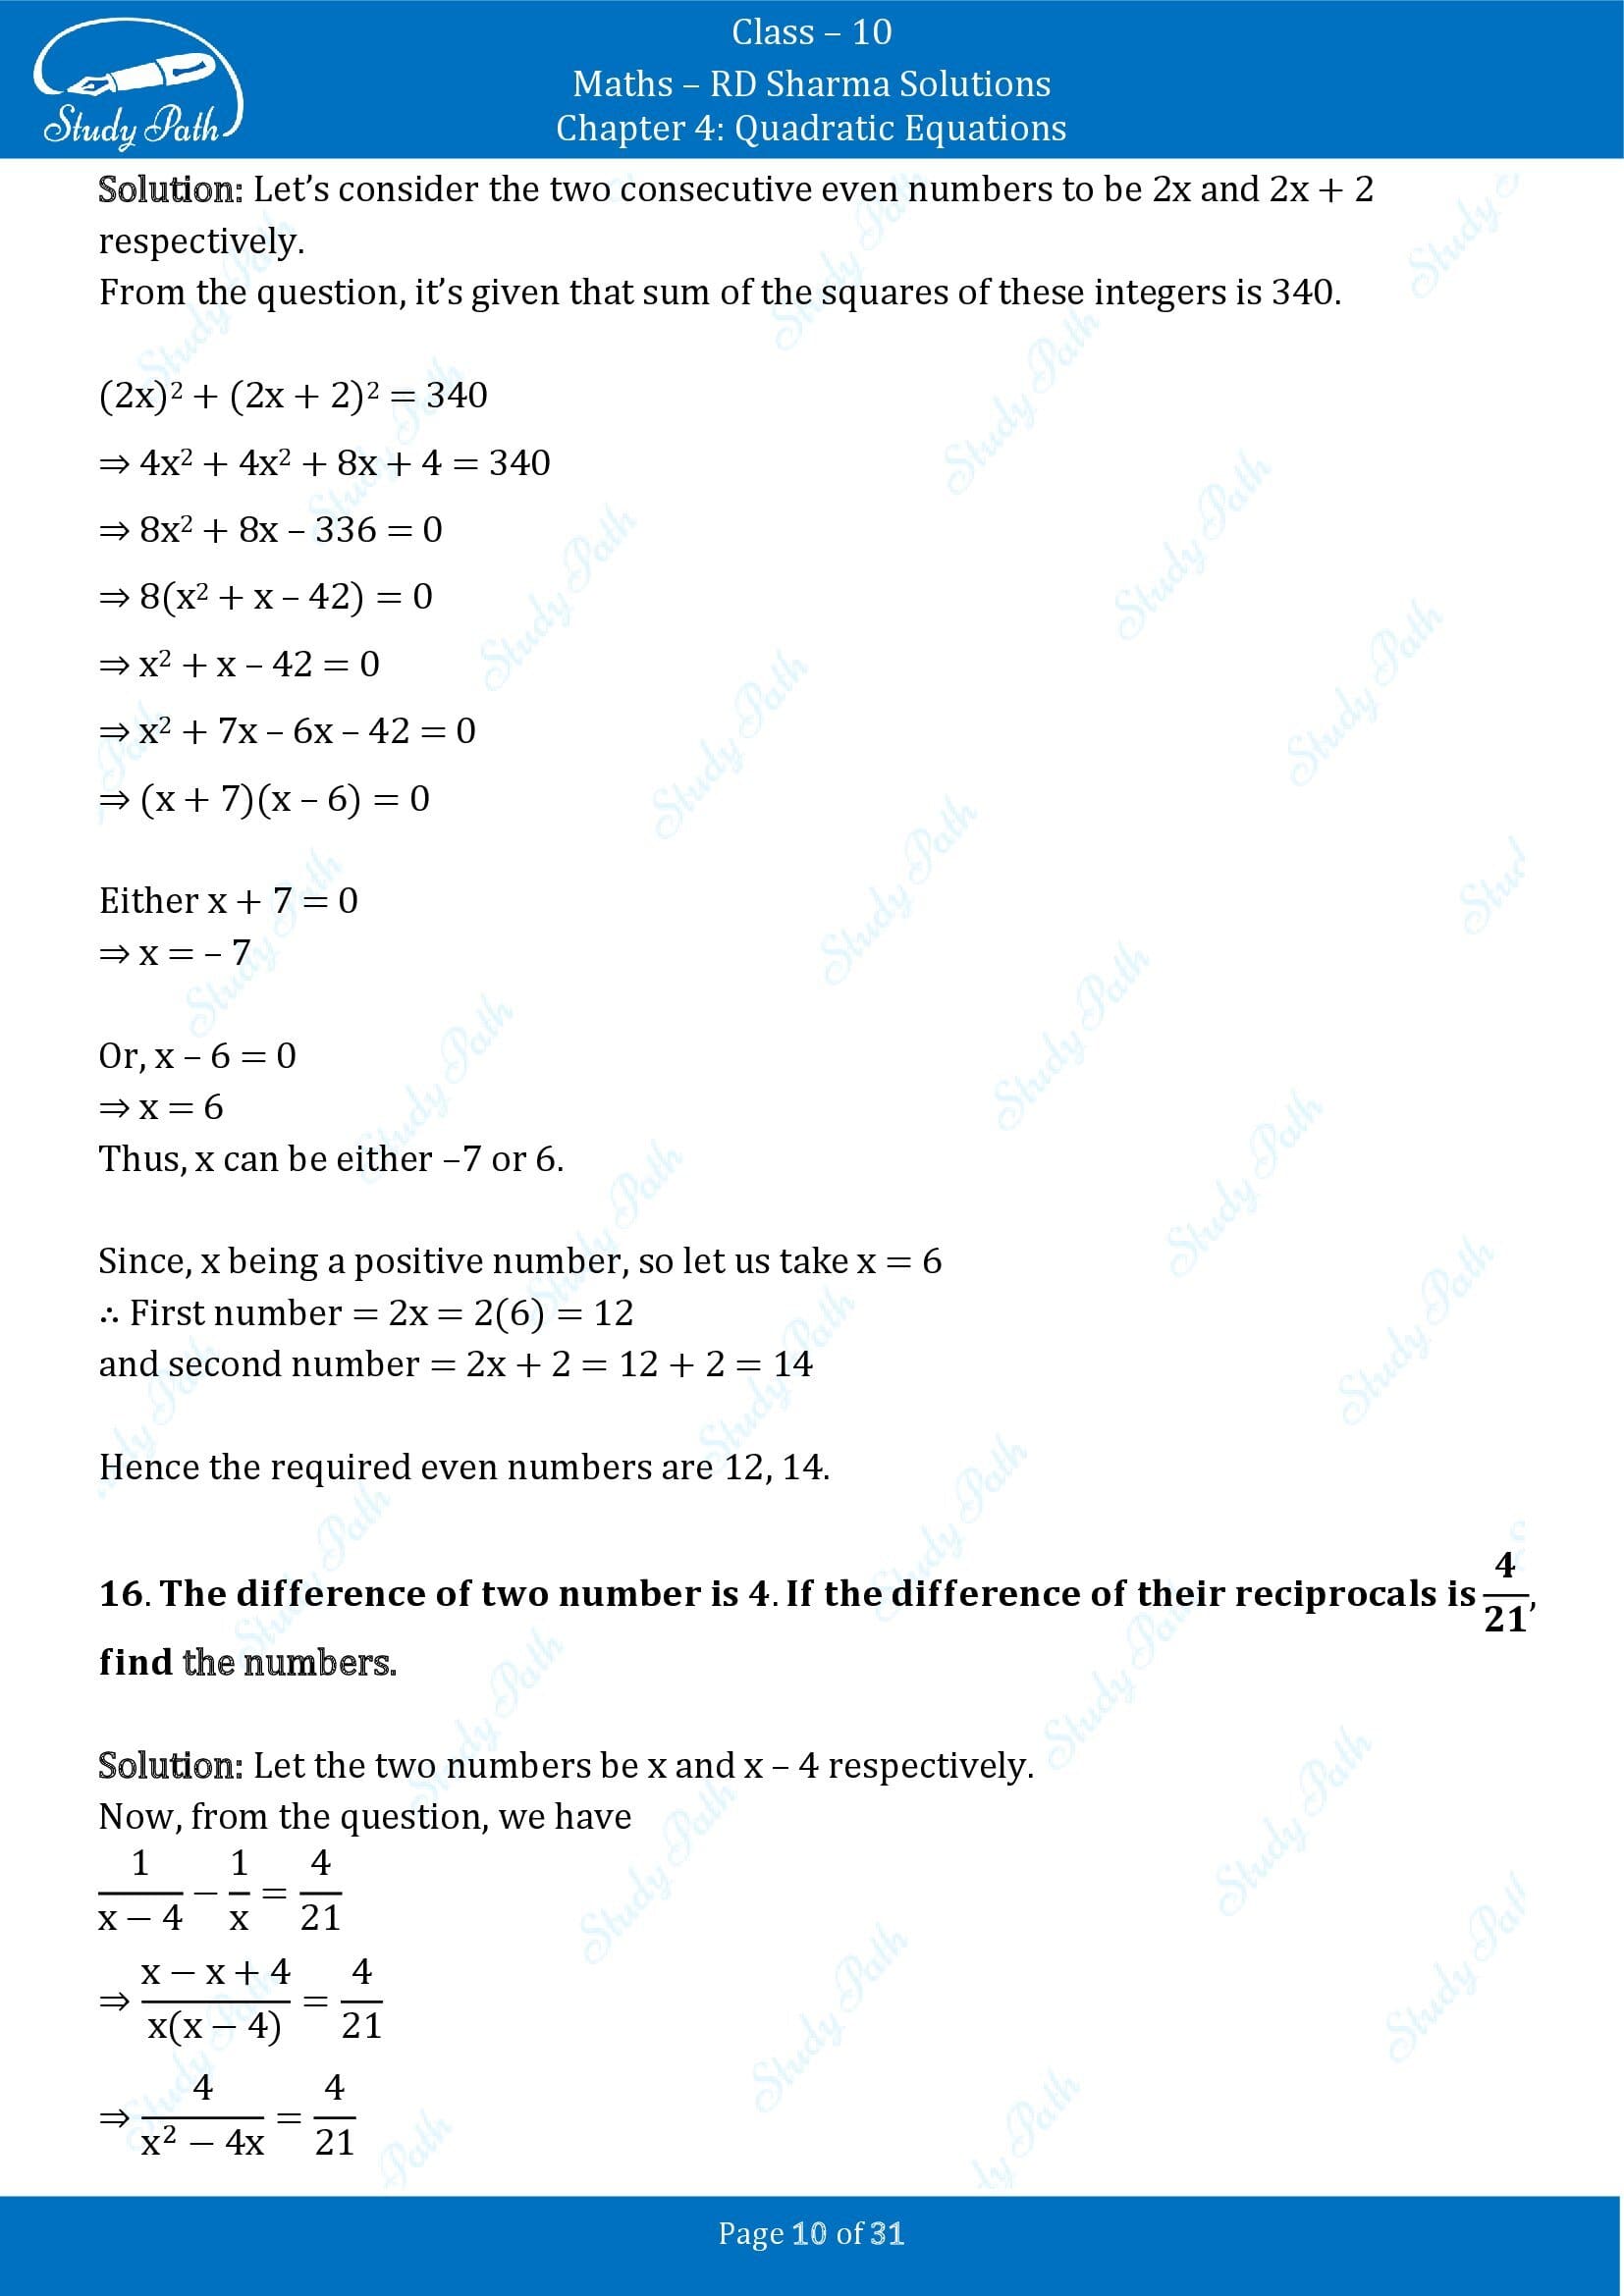 RD Sharma Solutions Class 10 Chapter 4 Quadratic Equations Exercise 4.7 00010